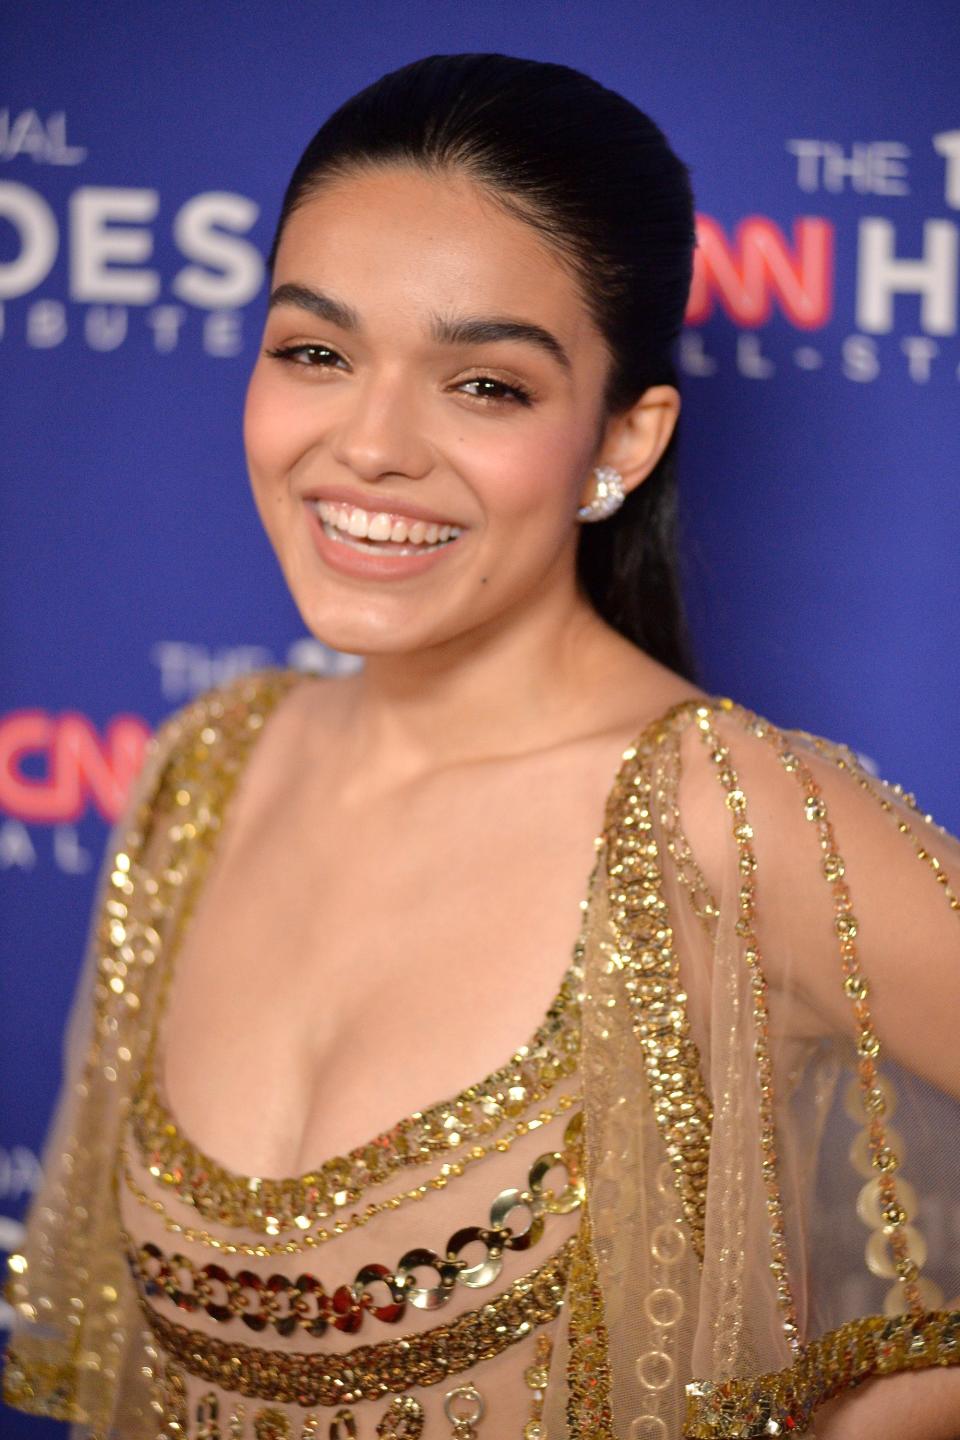 Close-up of Rachel smiling at an event